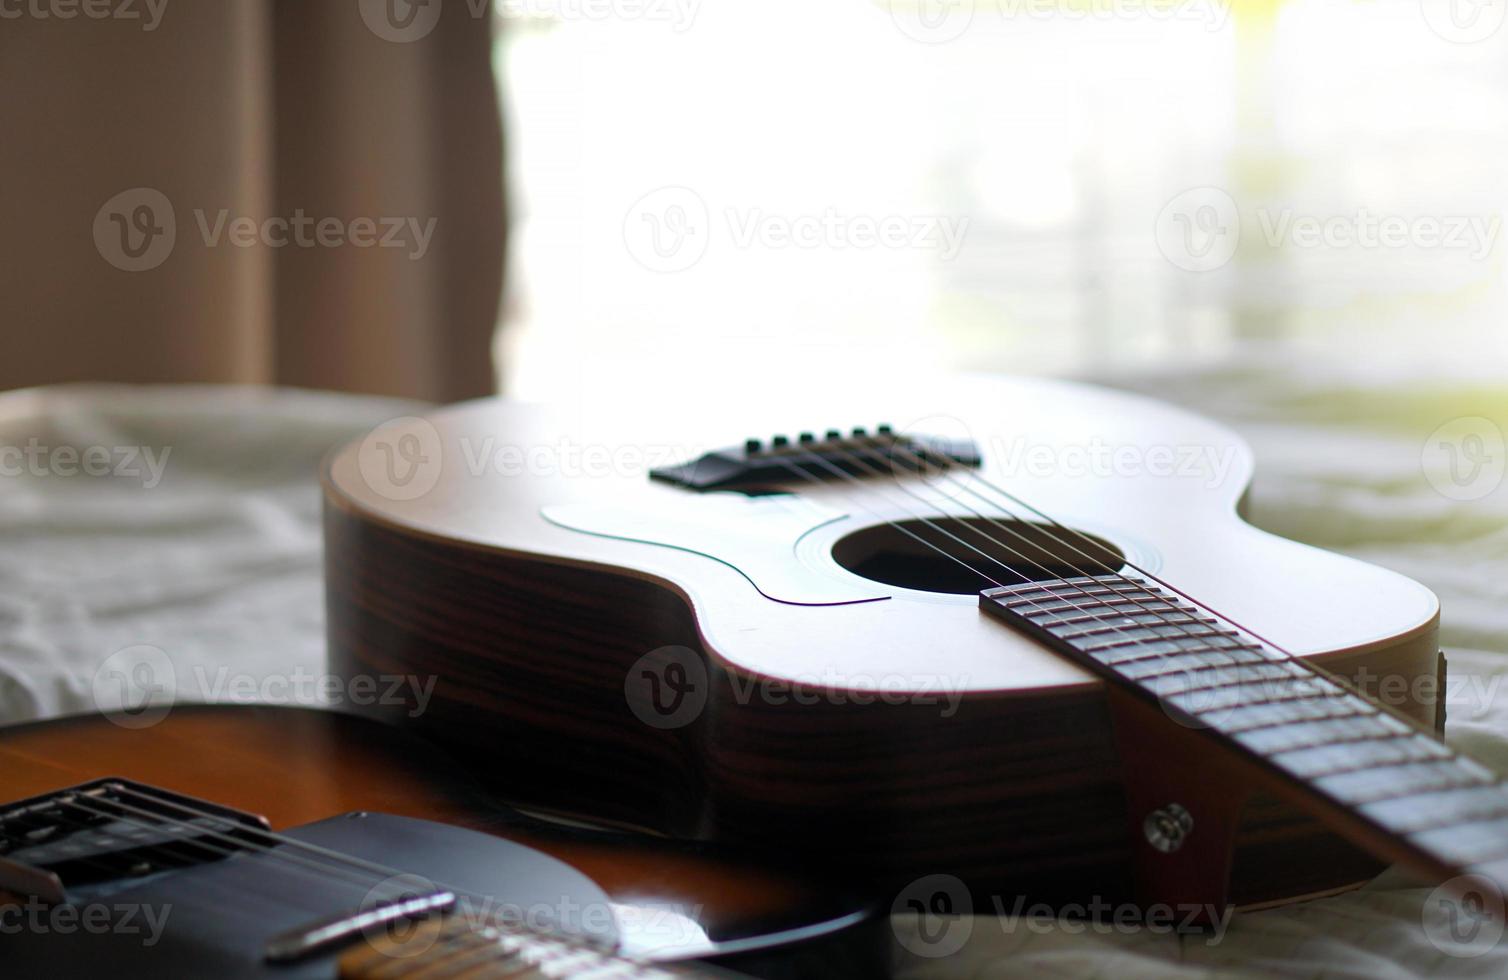 acoustic guitar, Used to play music and notes, for sing a song, macro abstract photo